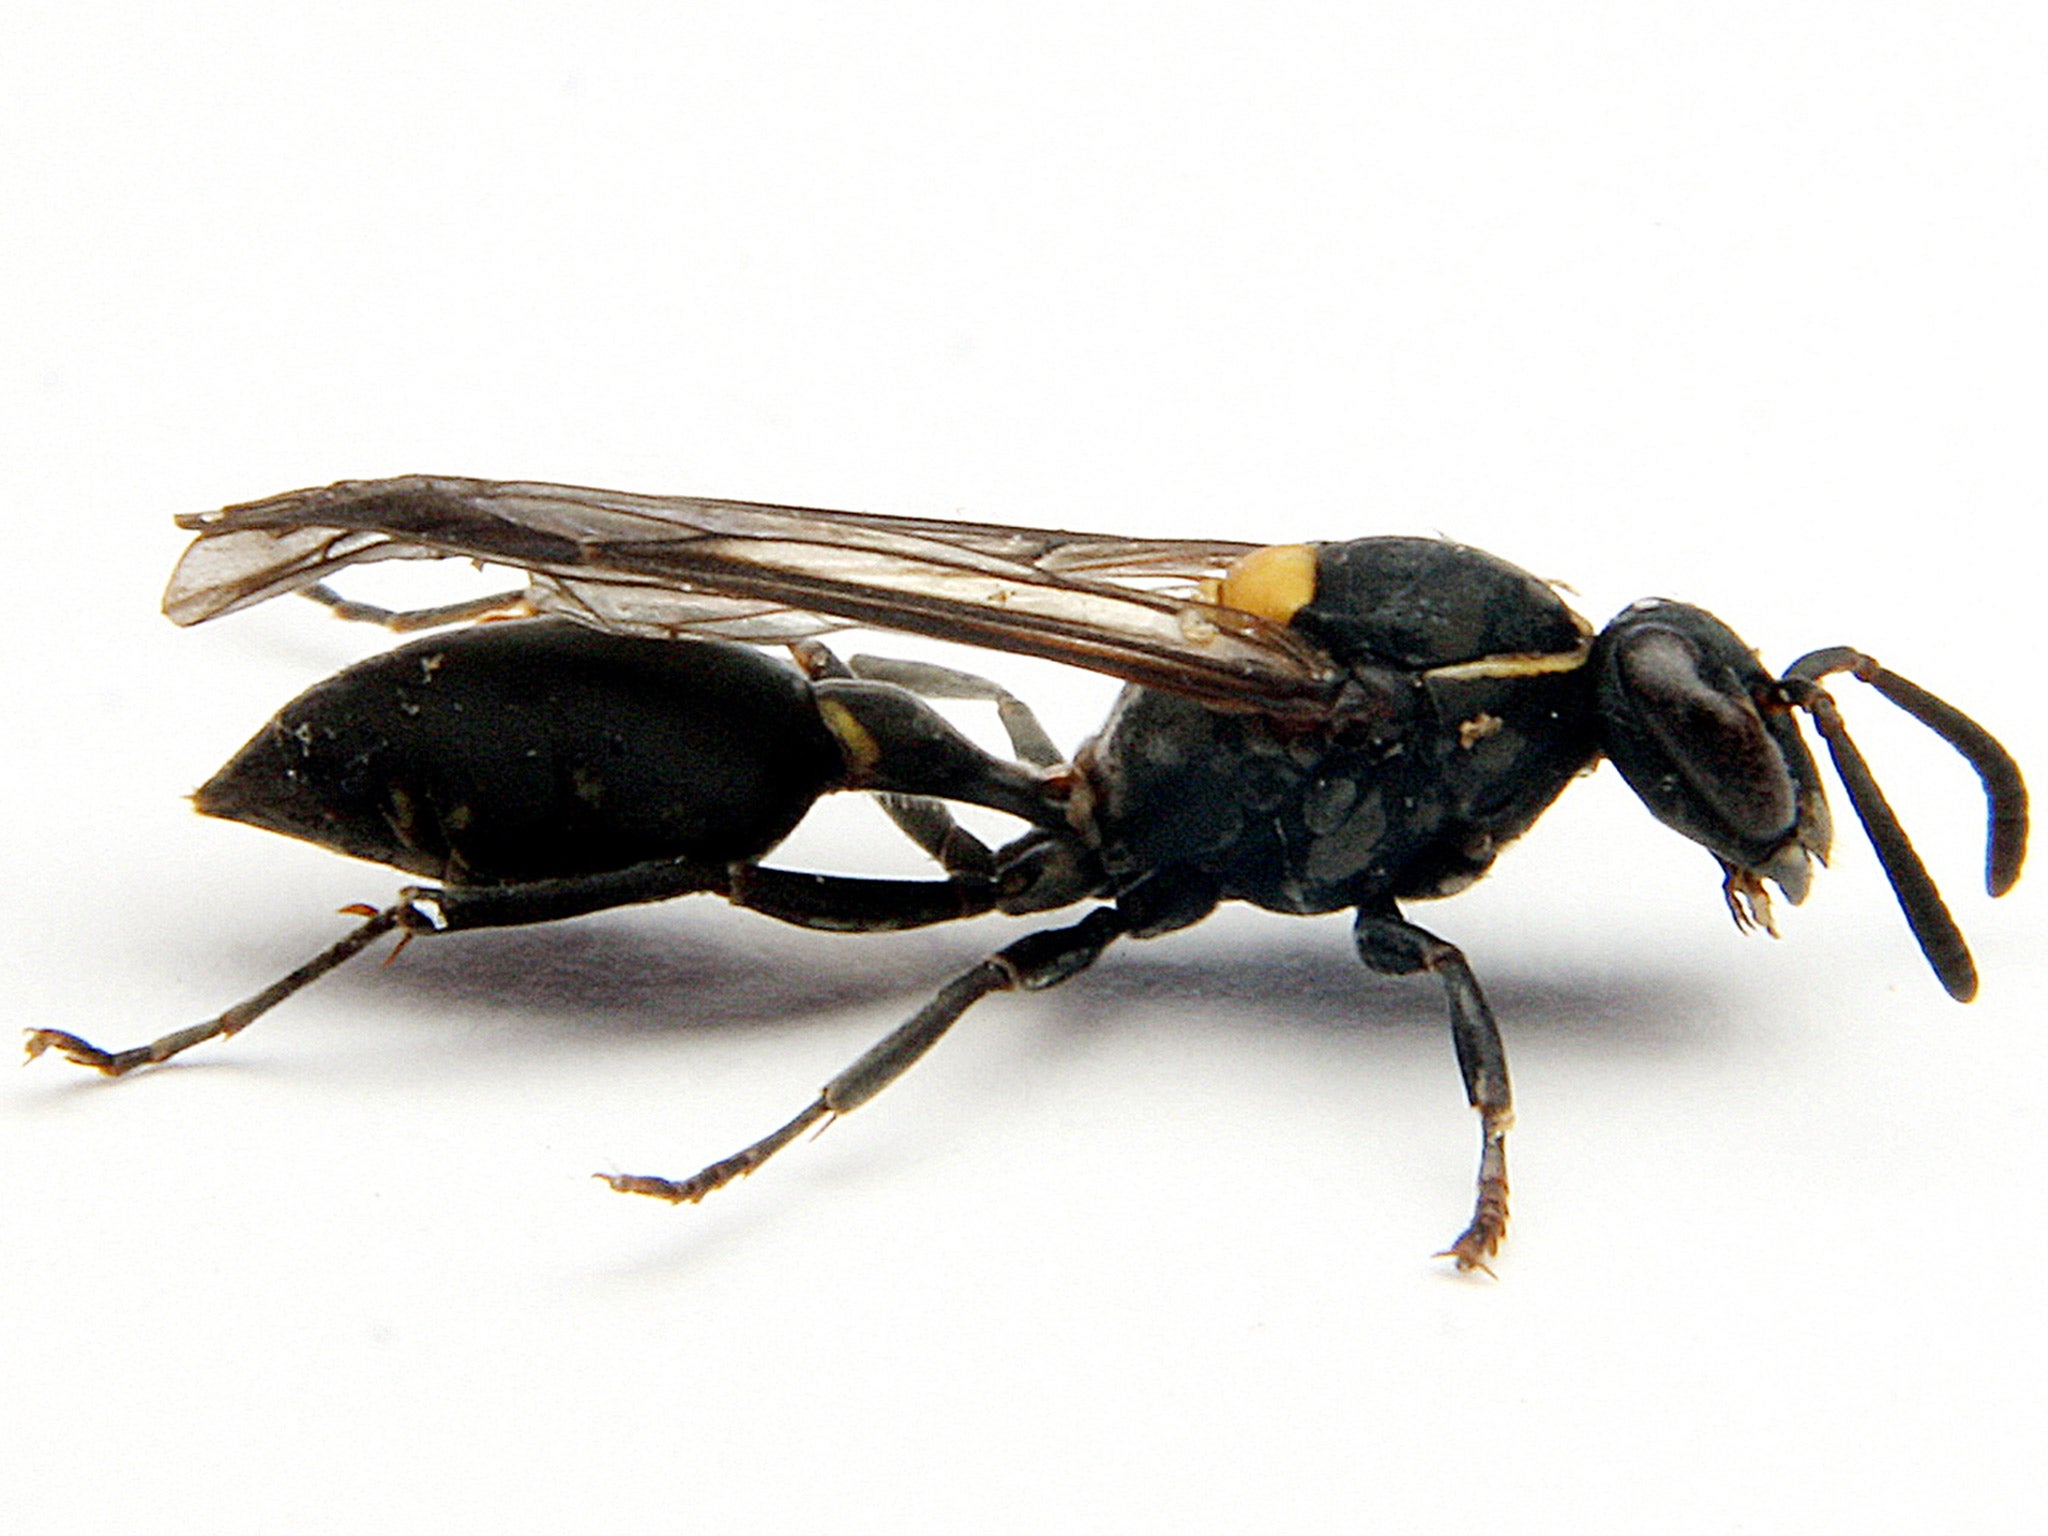 Brazilian social wasp Polybia paulista has cancer-fighting sting venom, research has shown